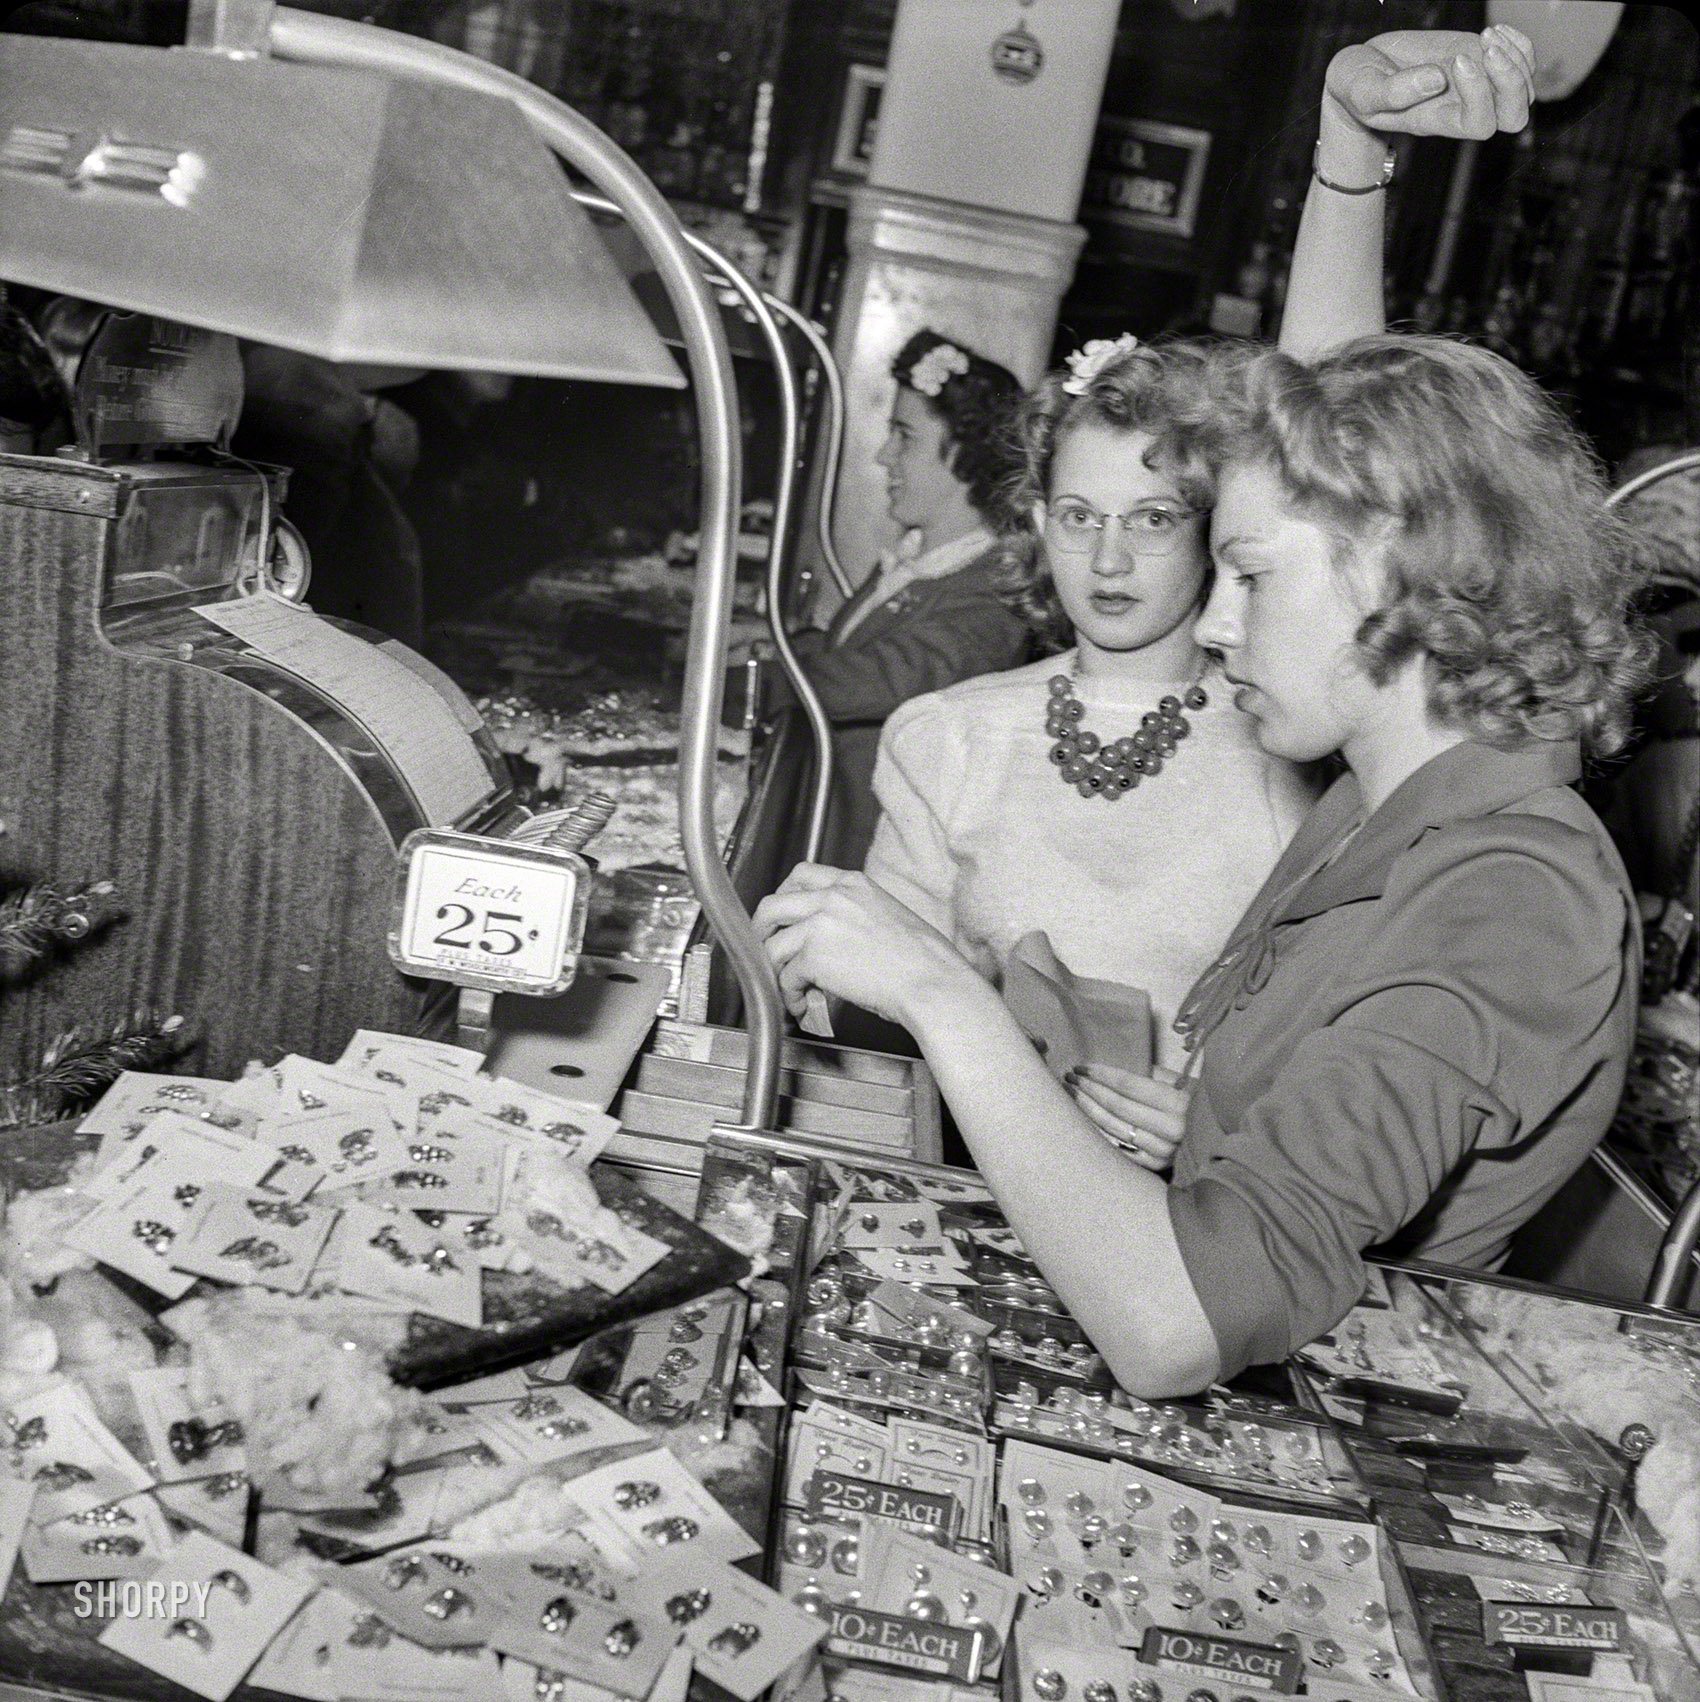 December 1941. Washington, D.C. "Christmas shopping. Salesgirls at Wool&shy;worth's." Photo by John Collier, Office of War Information. View full size.